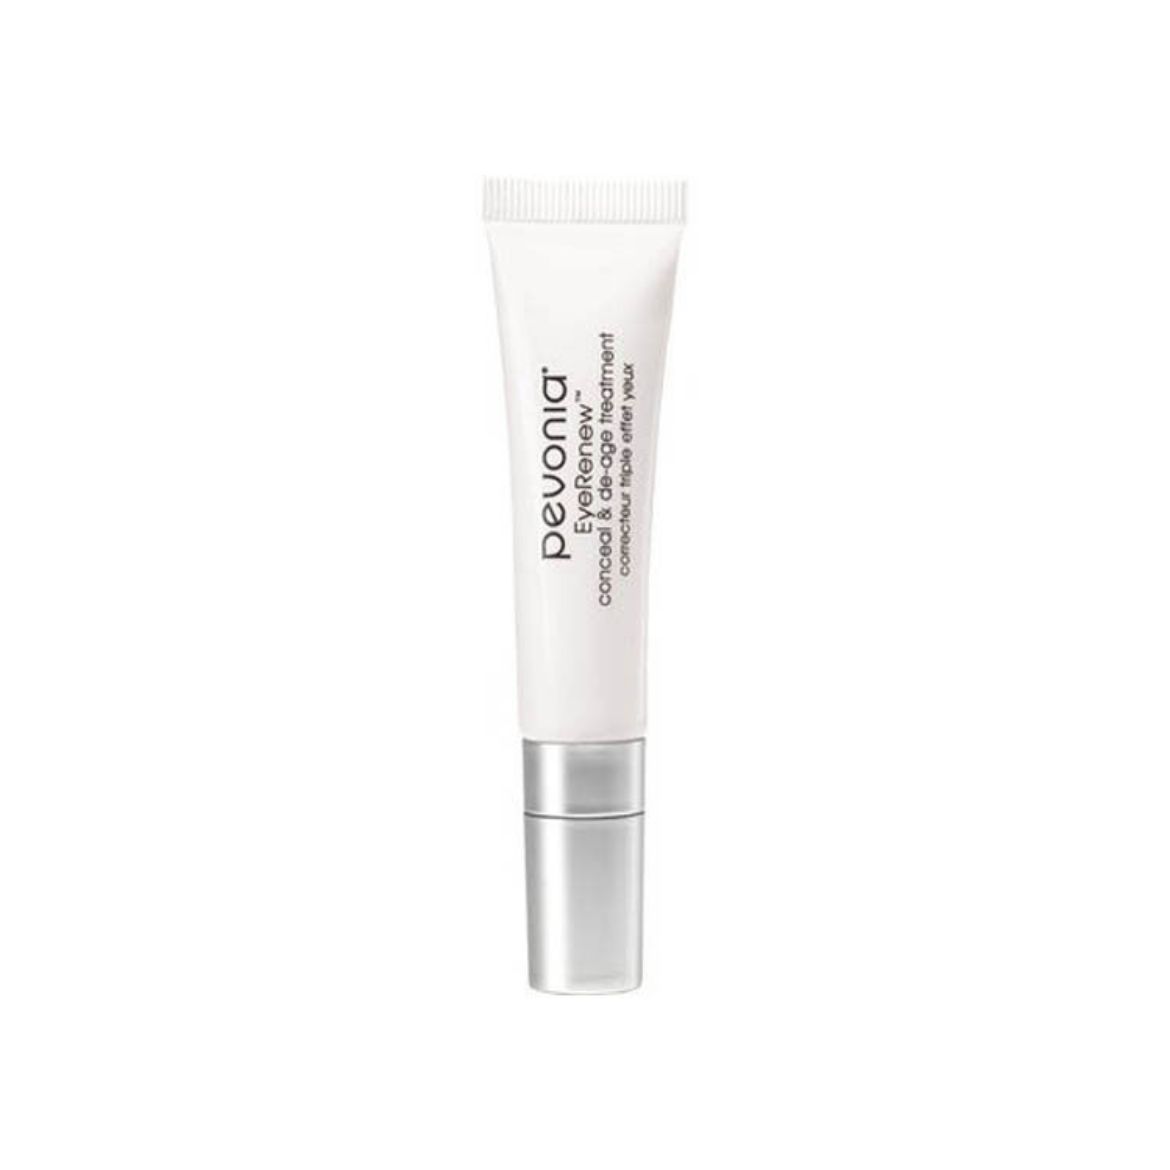 Image of Pevonia EyeRenew Conceal & De-Age Treatment (10g)